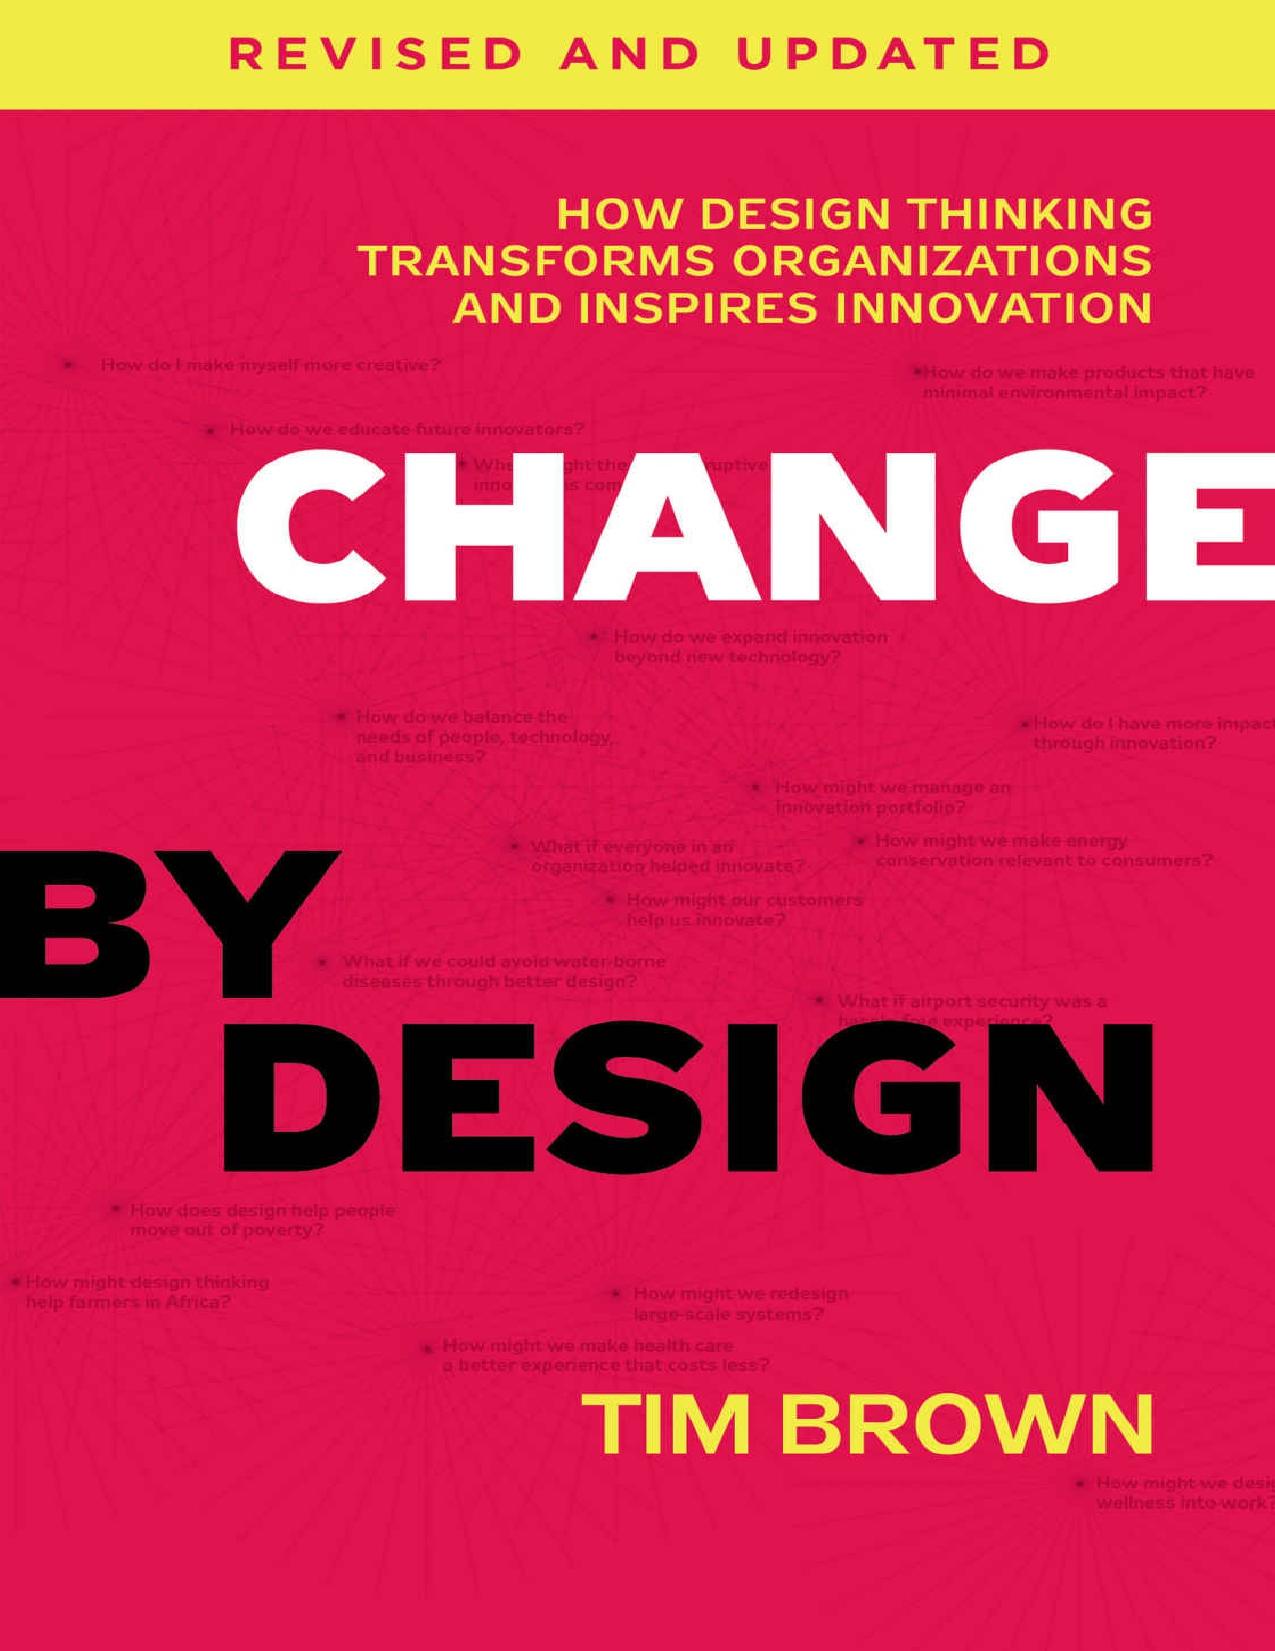 Change by Design, Revised and Updated - Tim Brown.jpg